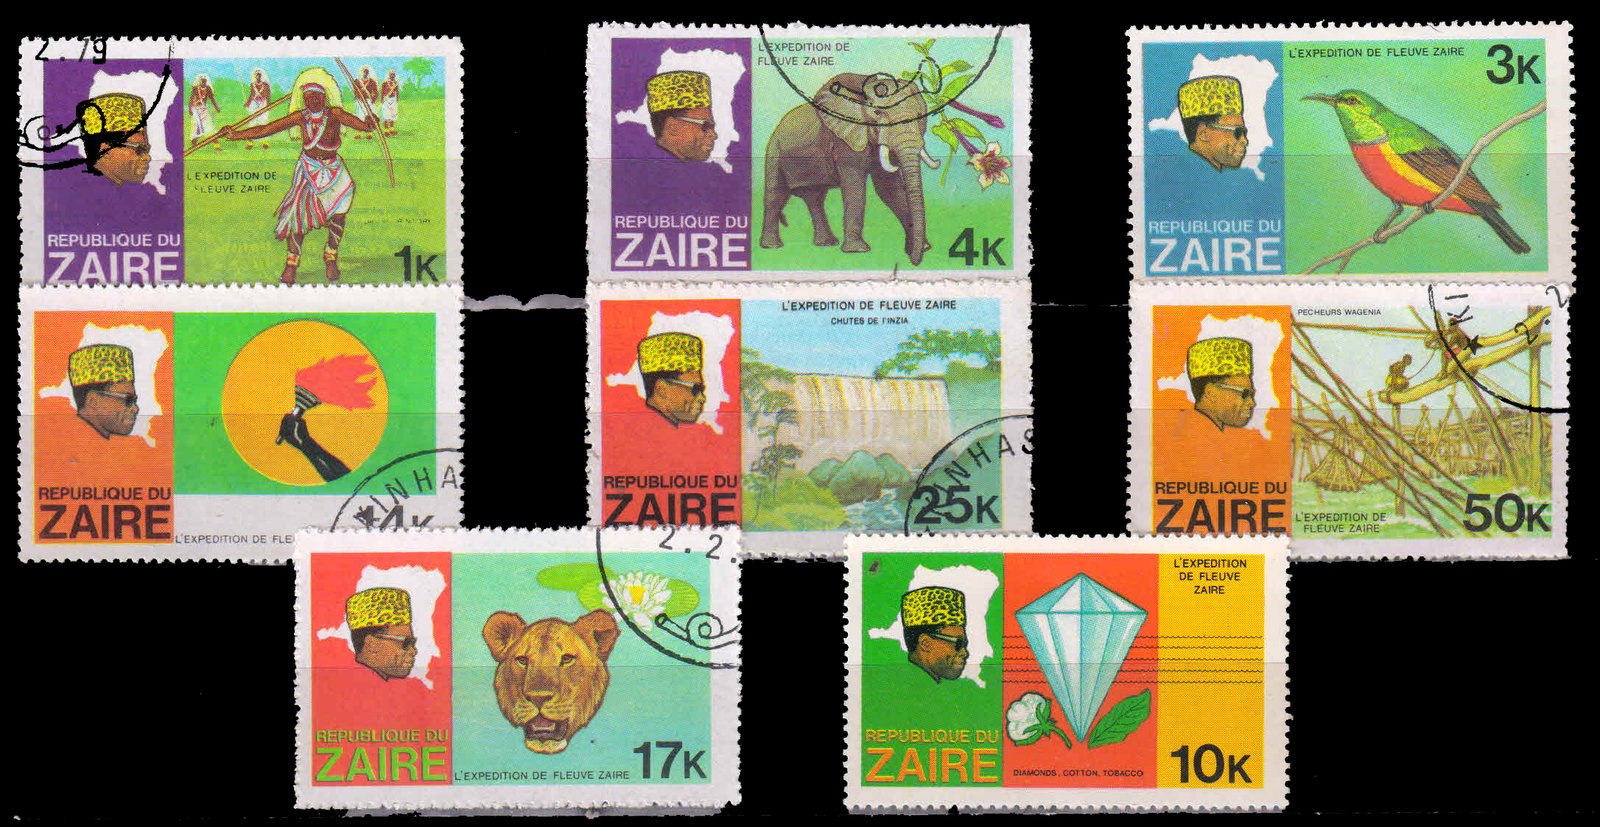 ZAIRE 1979 - River Expedition, Dancer, Bird, Waterfall, Animal, Complete Set of 8, Used Stamps, S.G. 952-959